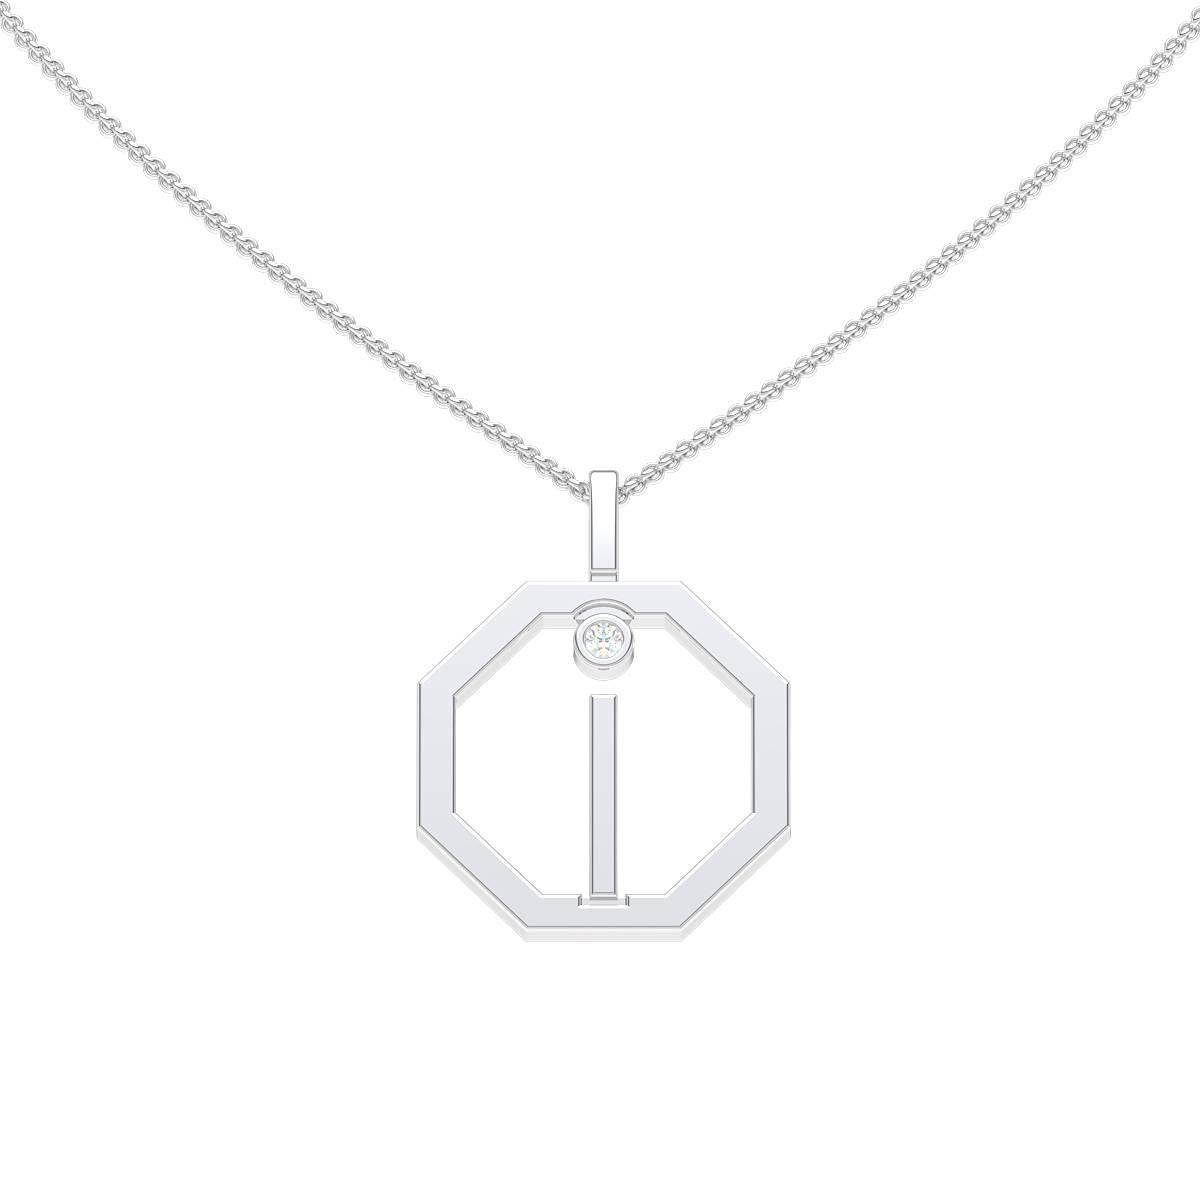 Our diamond initial pendant makes the perfect personalised gift. Handcrafted to order in our Sydney studios in 18 karat rose gold and set with a sparkling diamond, this timeless octagonal pendant is sure to delight. Chains sold separately, please